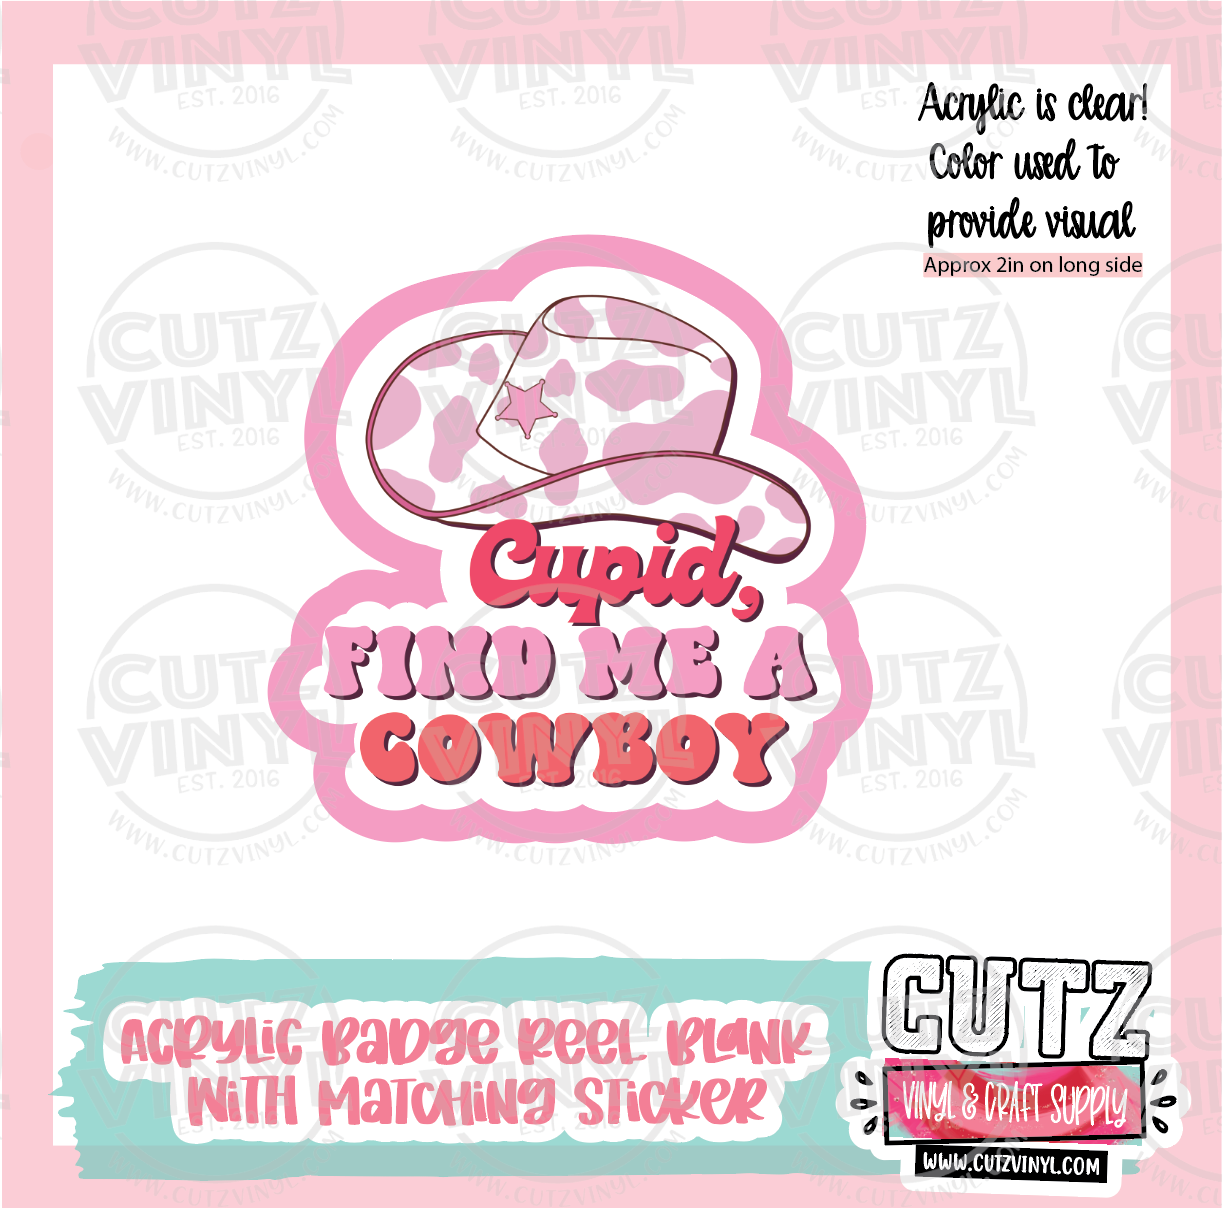 Cupid Cowboy - Acrylic Badge Reel Blank and Matching Sticker